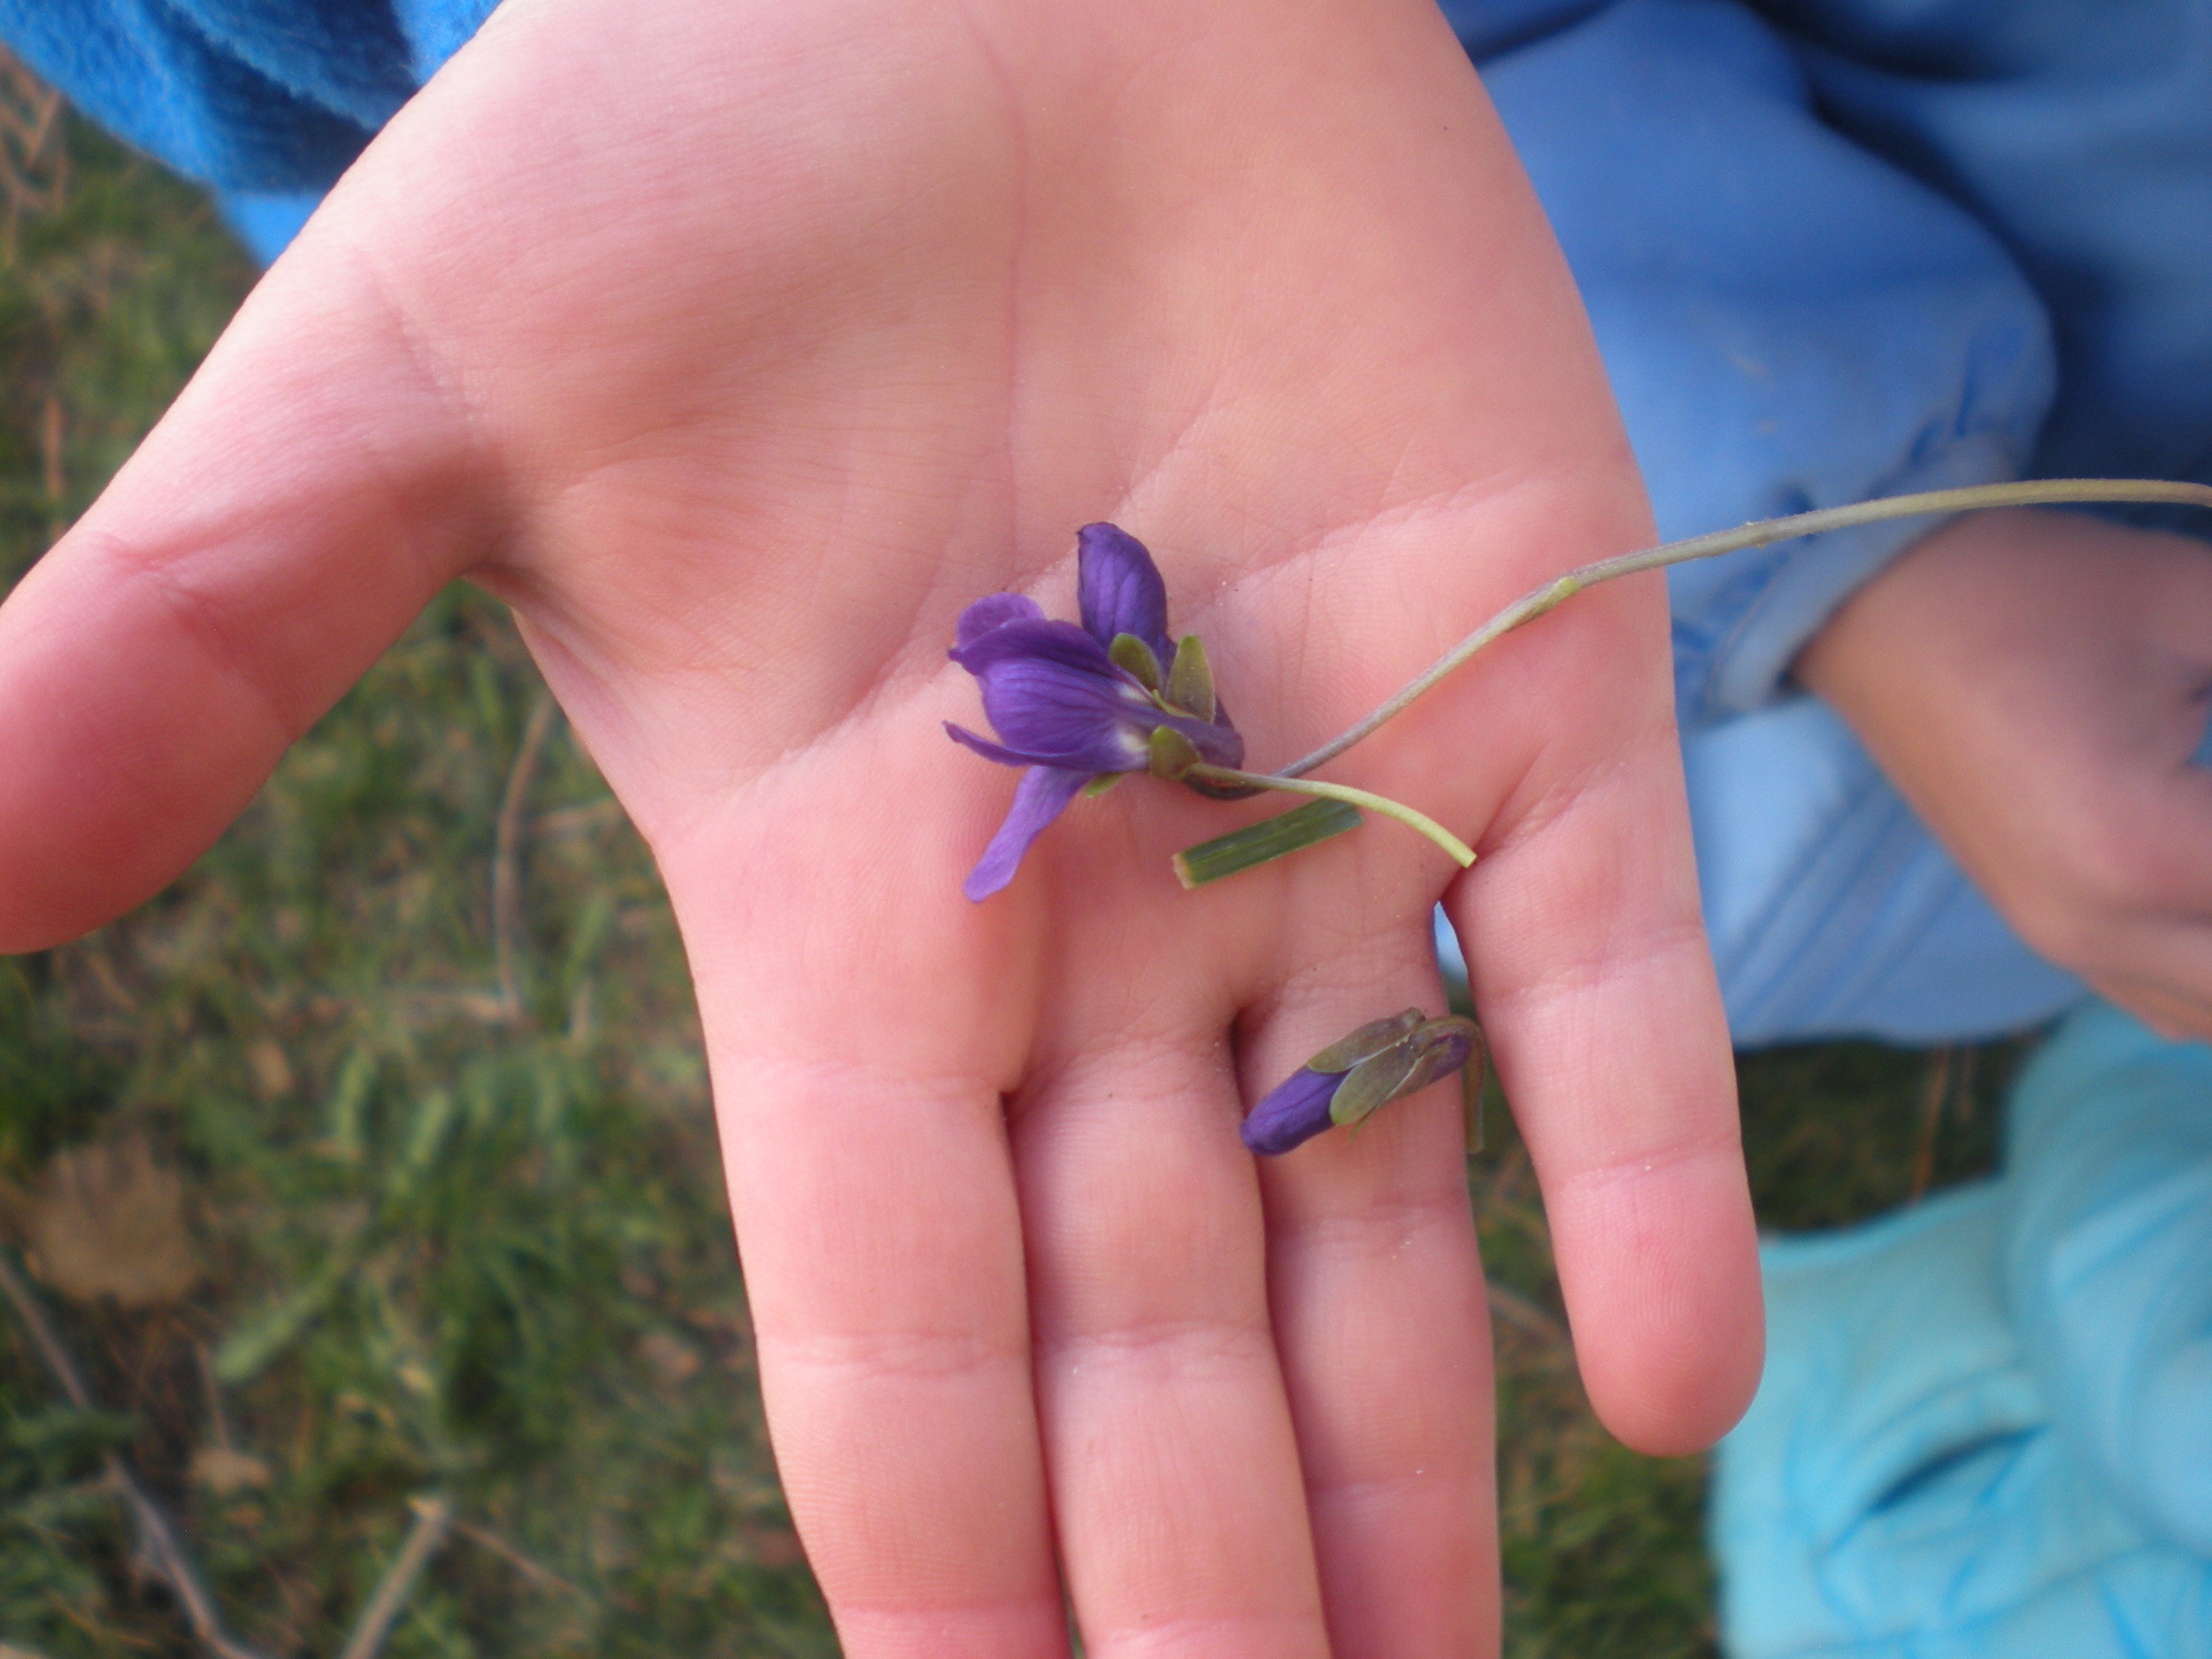 Little hand holding a fresh picked violet